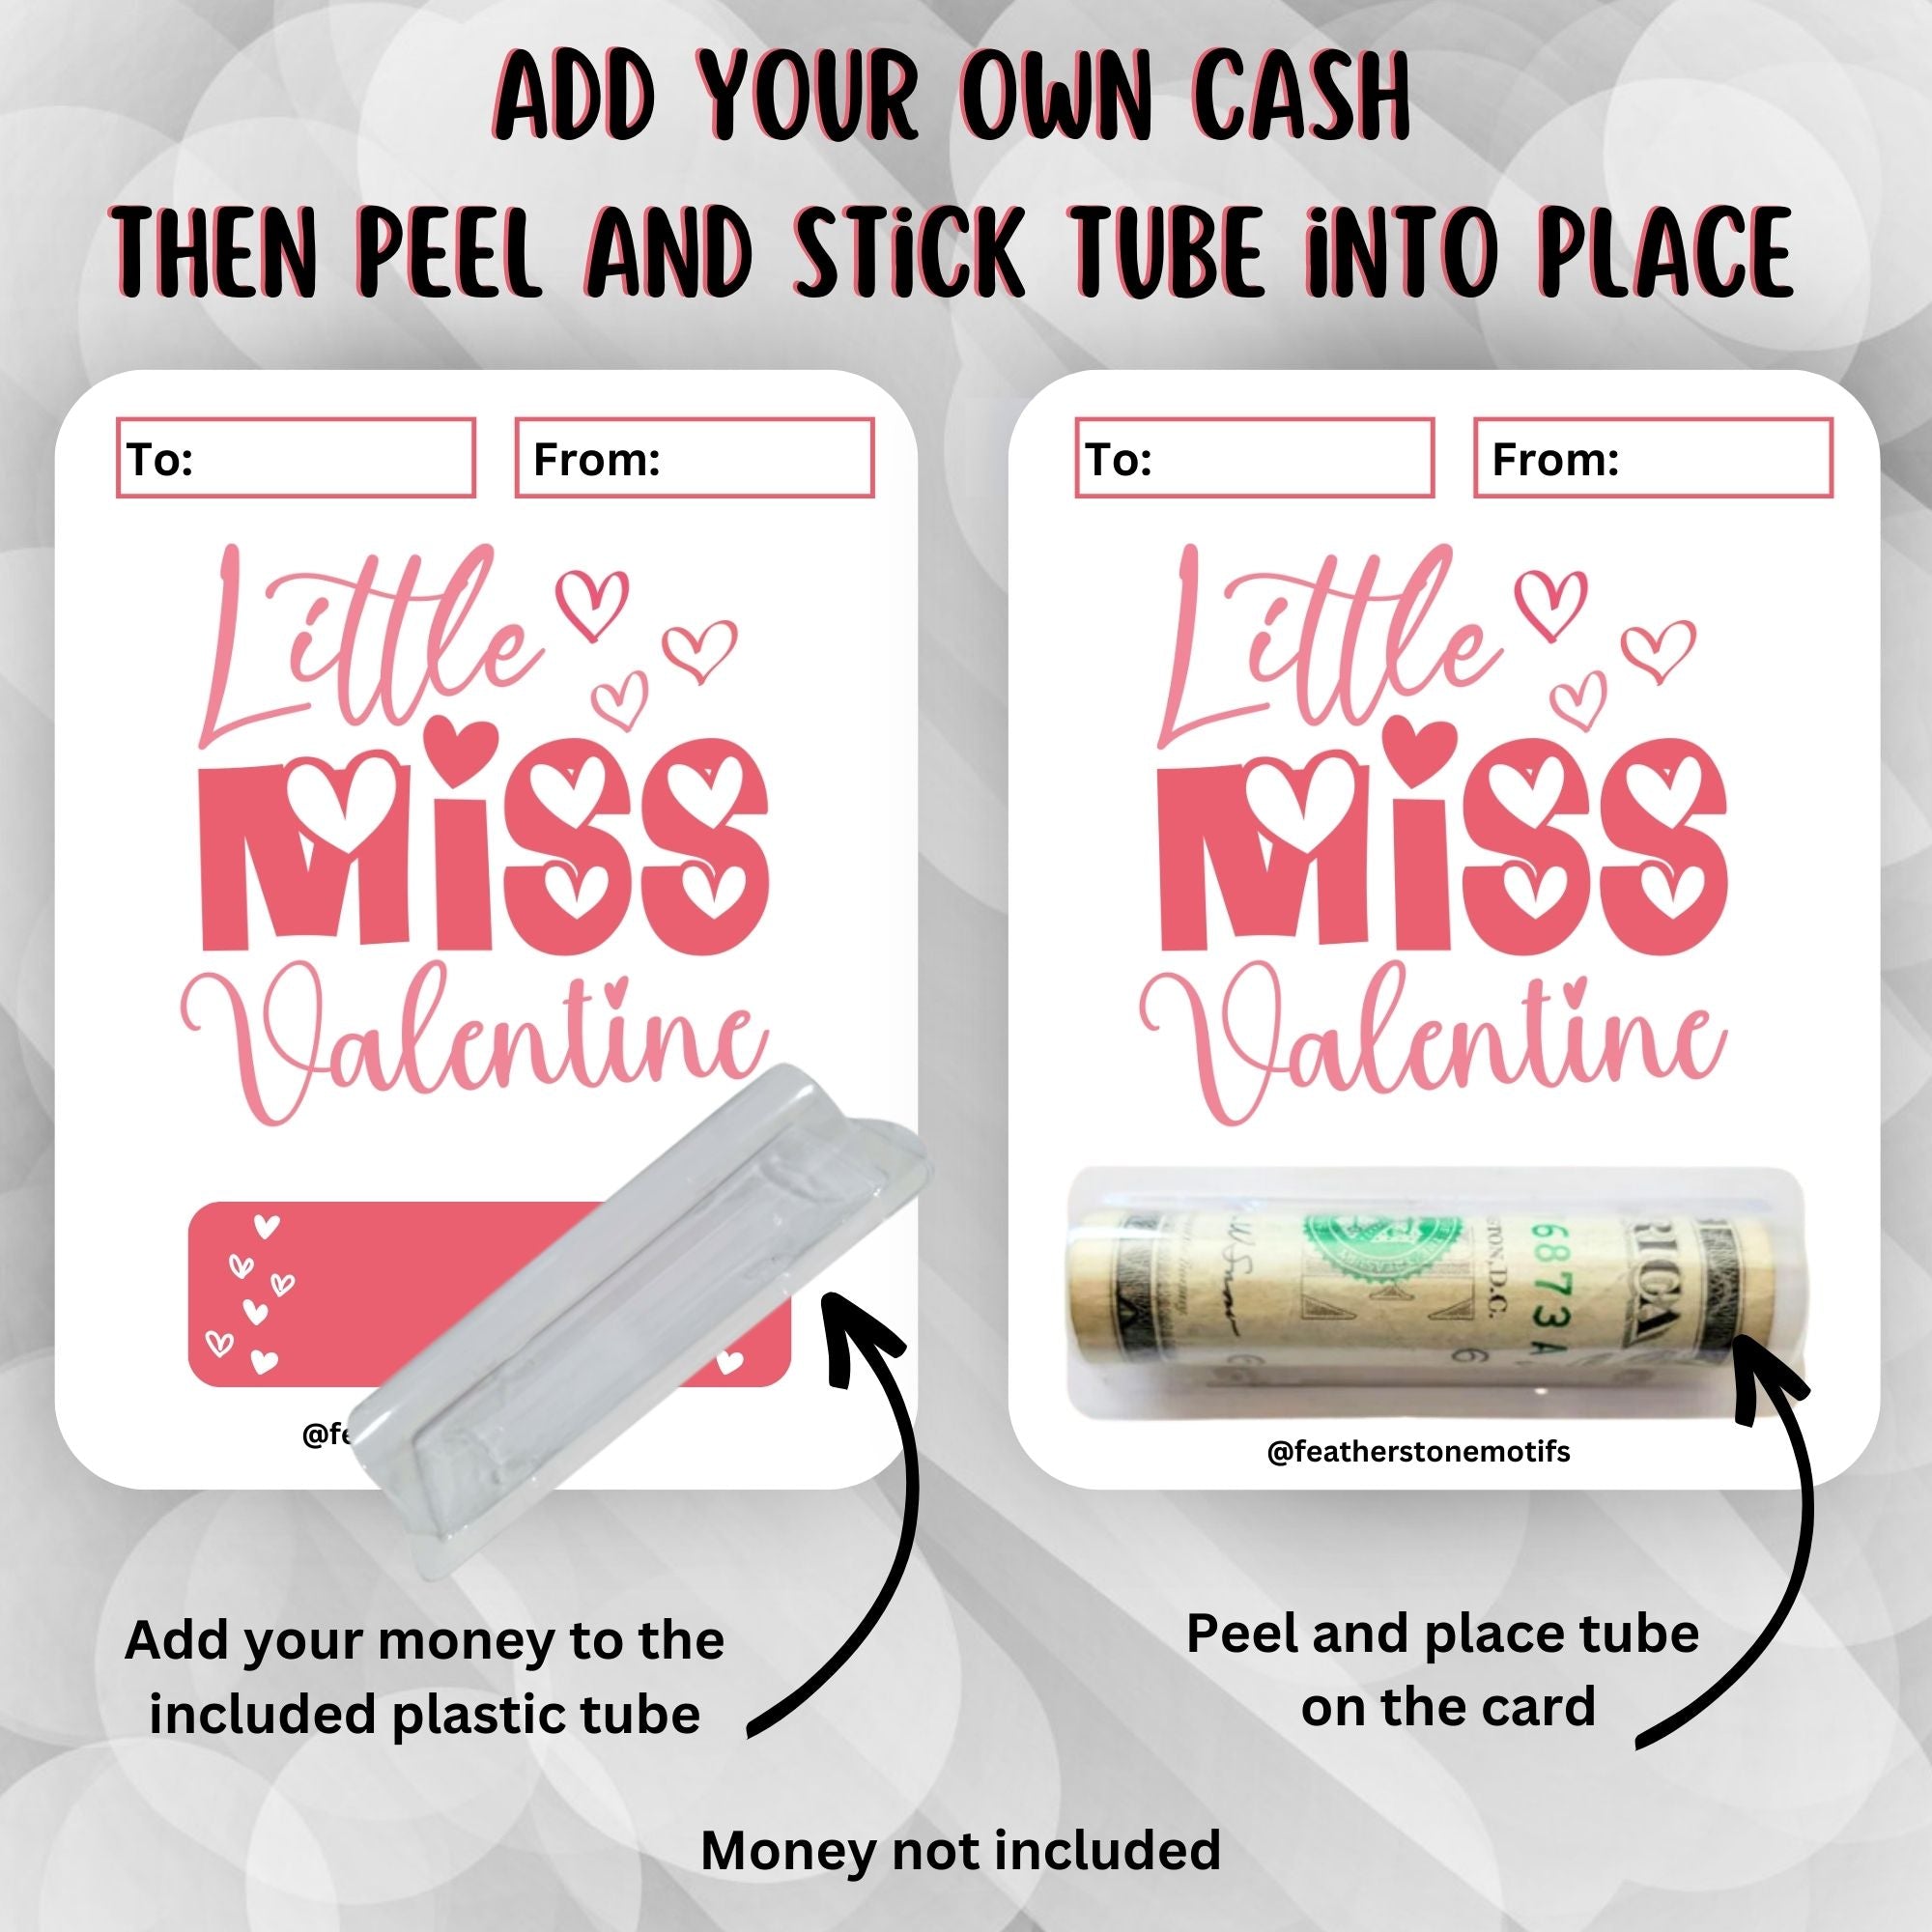 This image shows how to attach the money tube to the Little Miss Valentine Money Card.